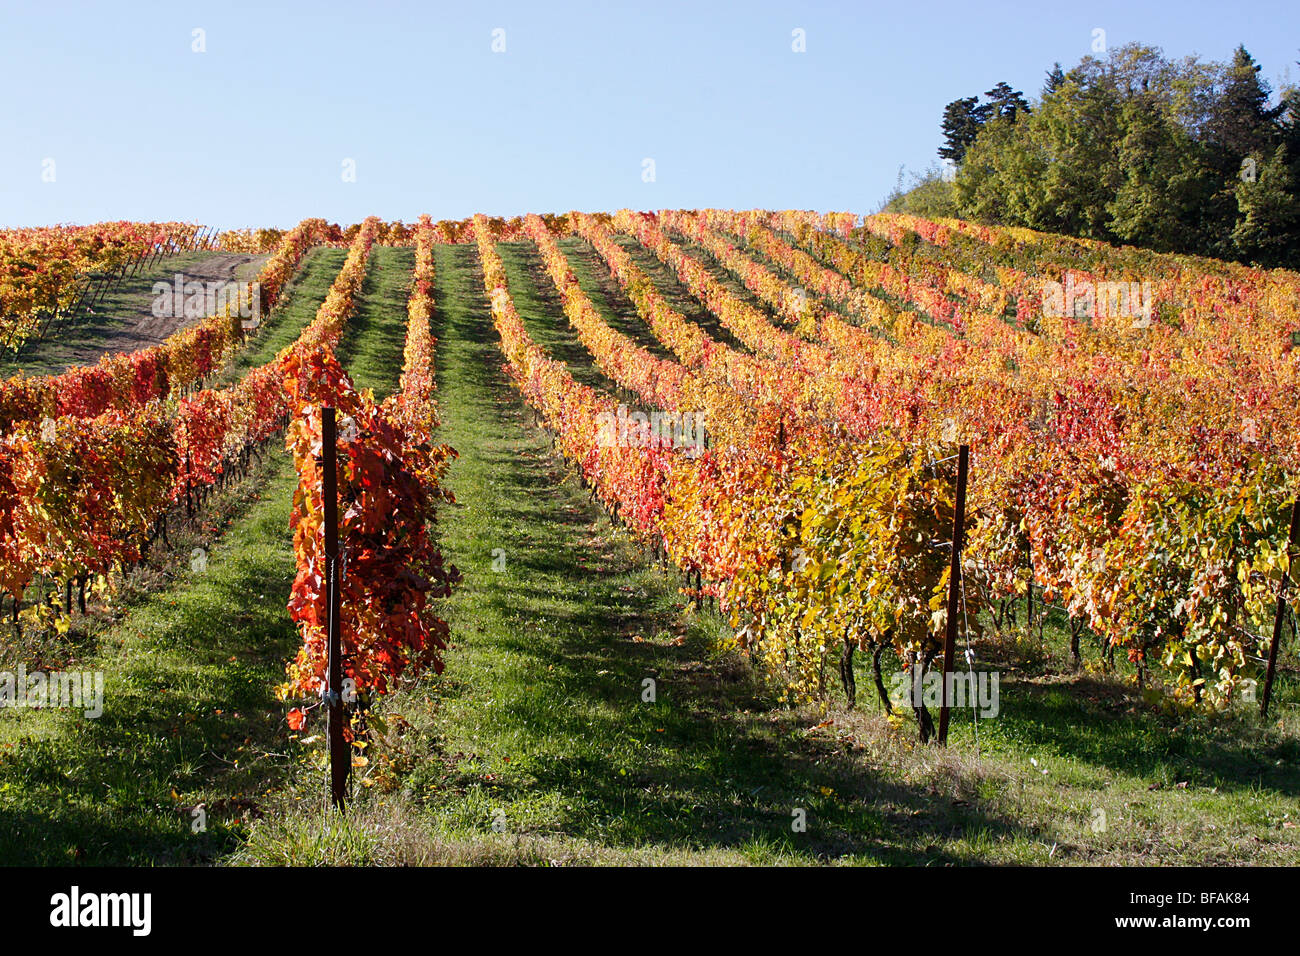 Wine producing grapes  growing in a vineyard in Le Marche,Italy. Stock Photo